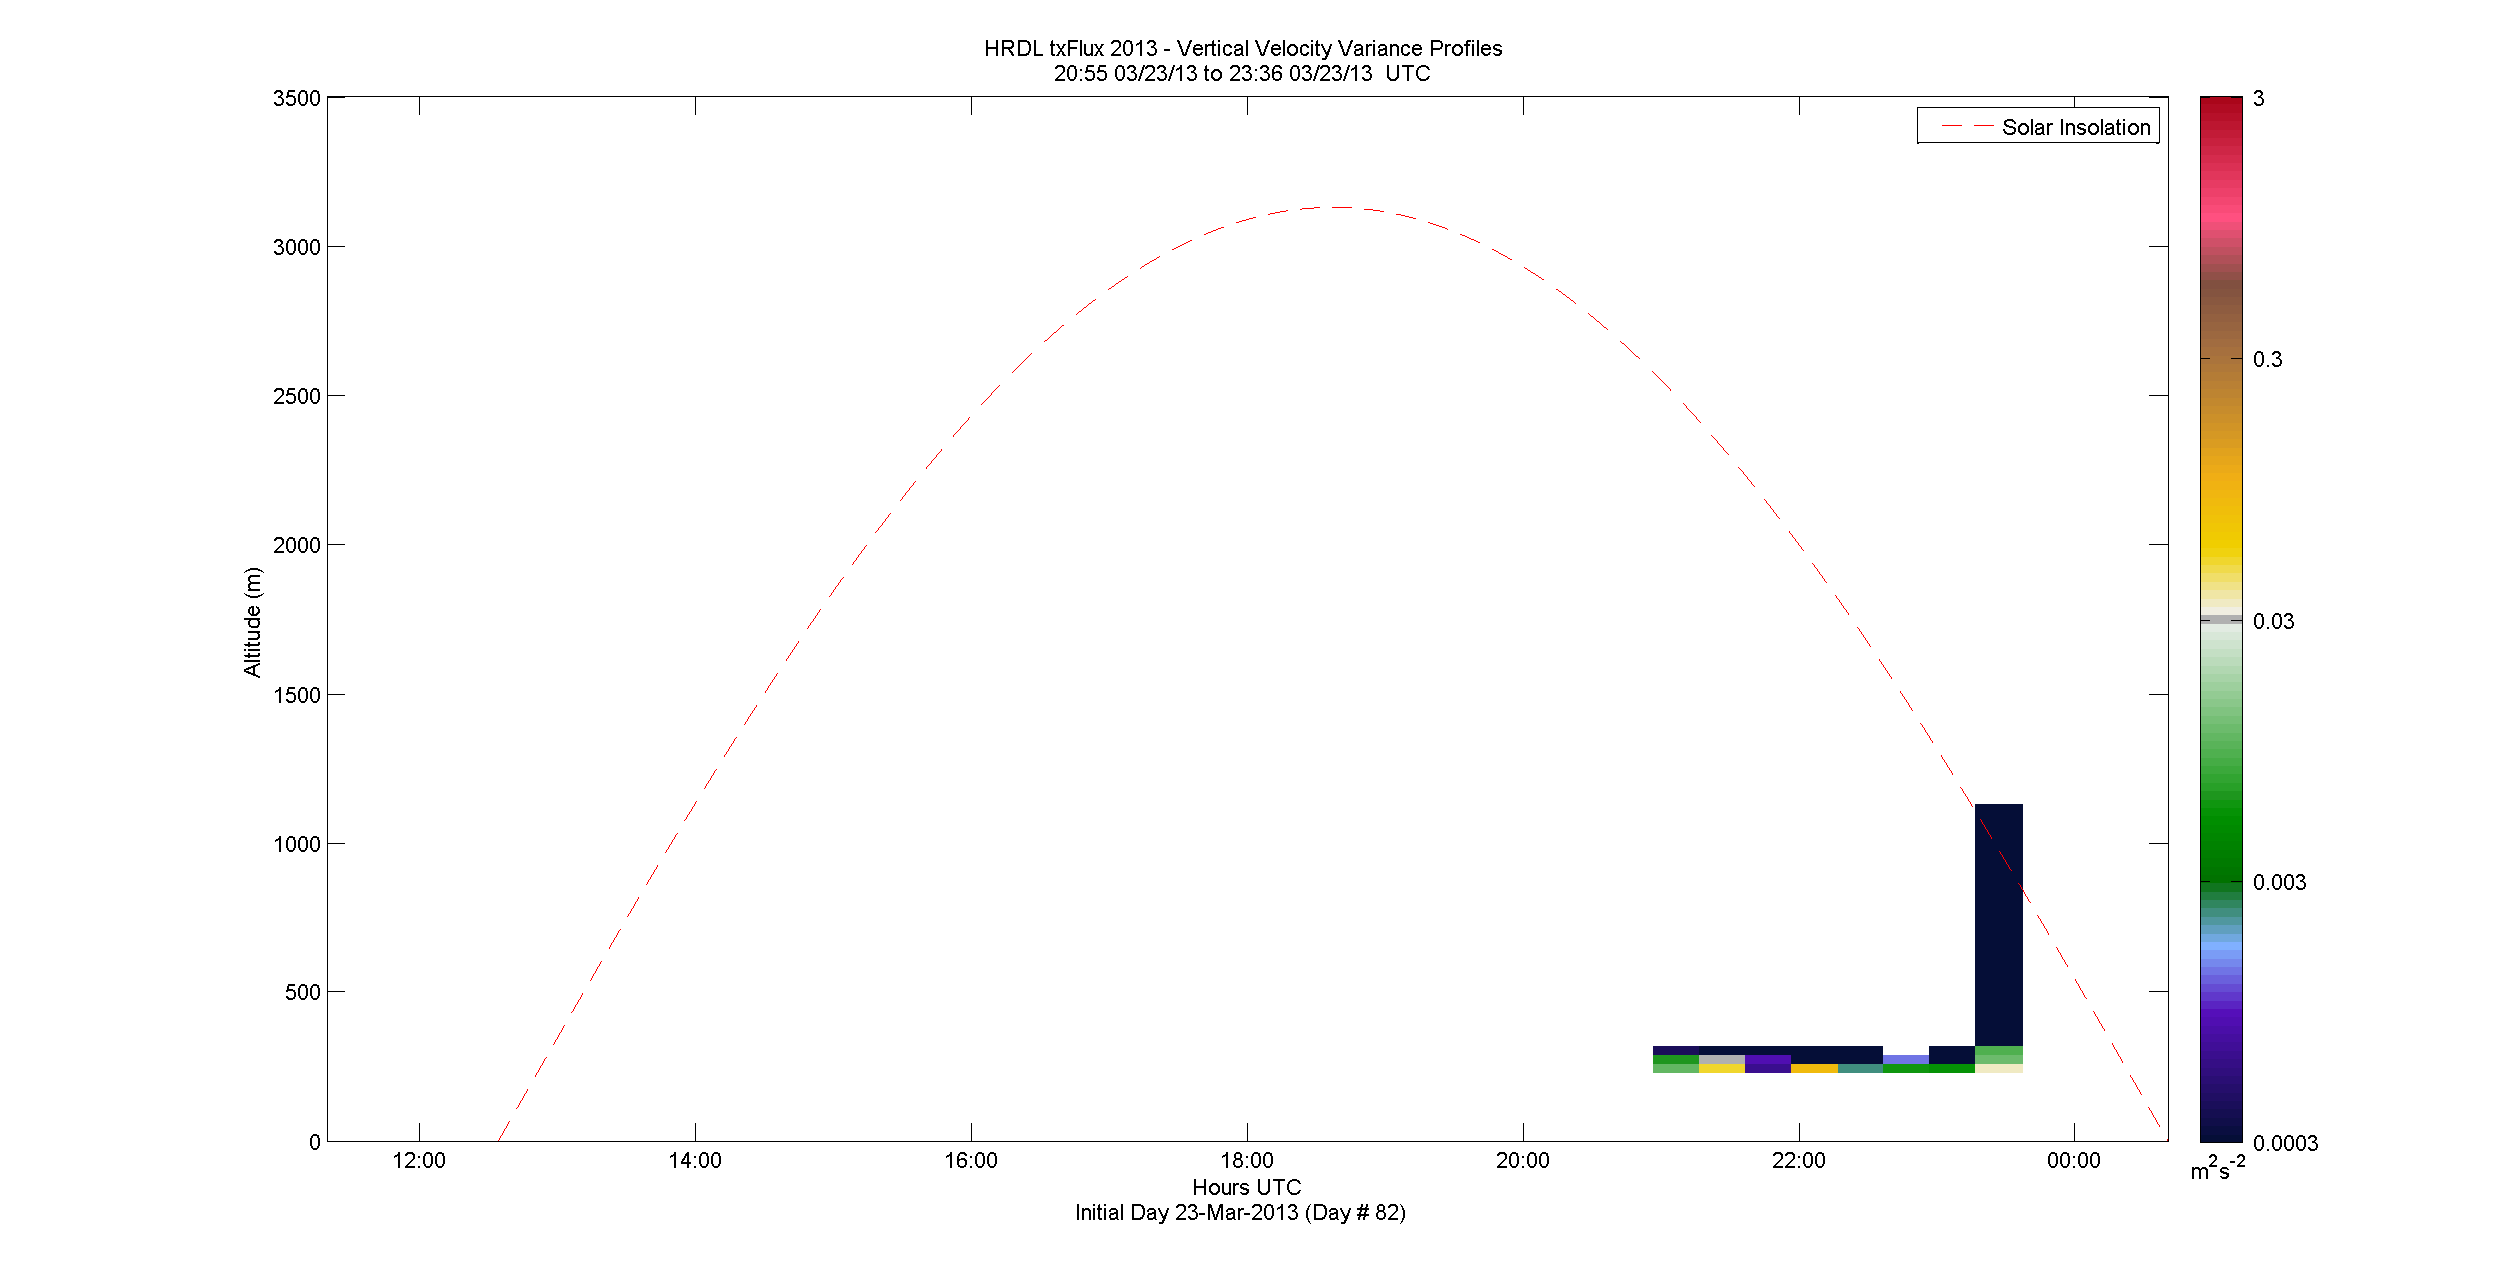 HRDL vertical variance profile - March 23 pm